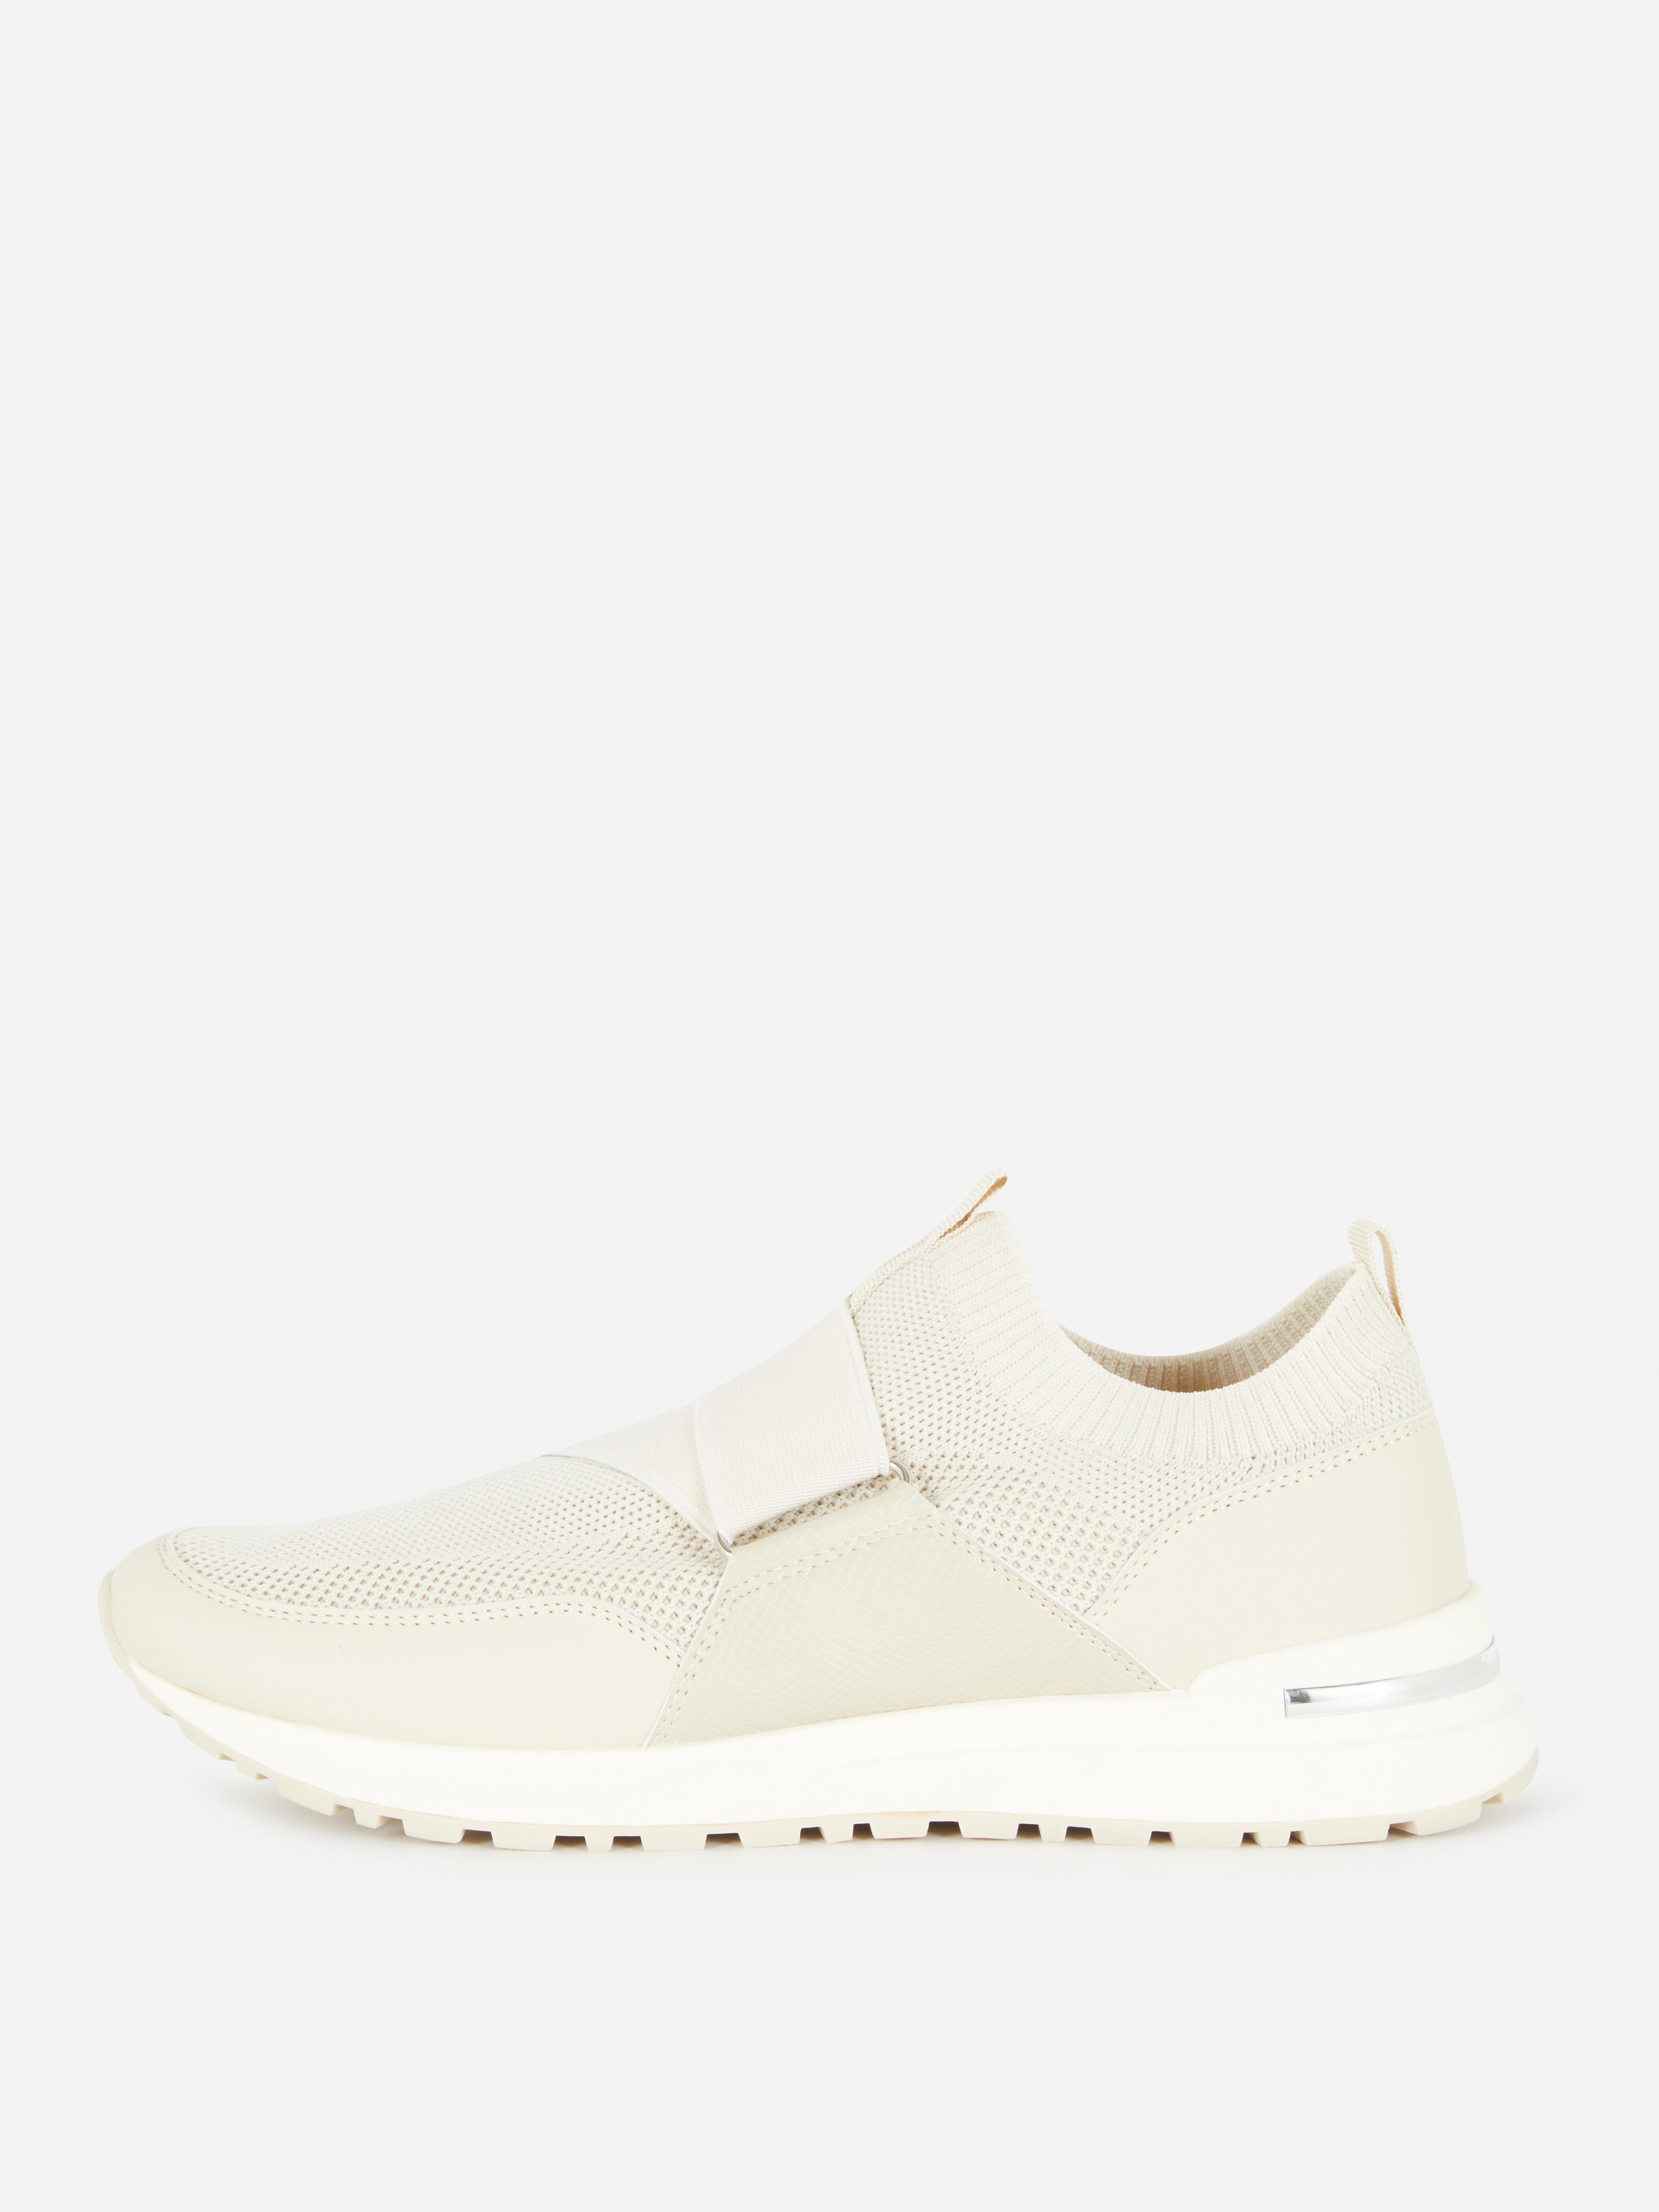 Slip-on Knitted Trainers | Women's Trainers | Women's Shoes & Boots ...